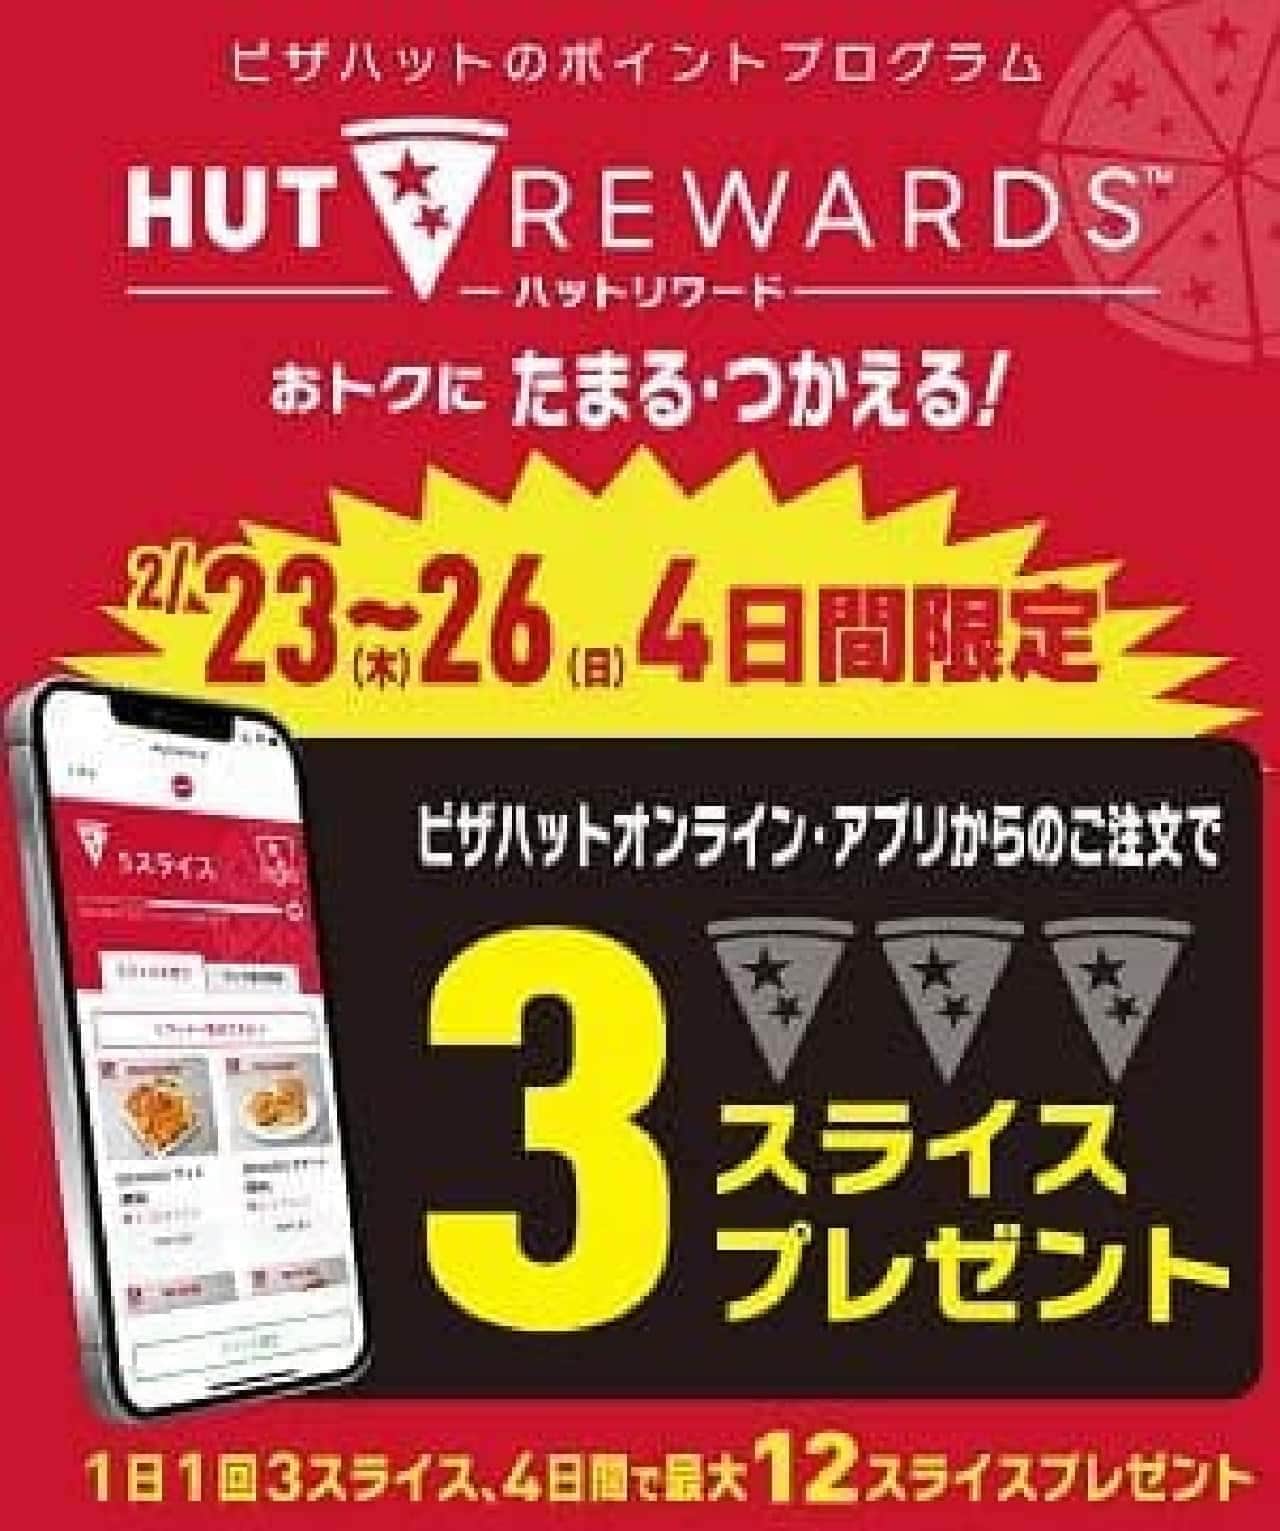 Pizza Hut Lifestyle Support Sale